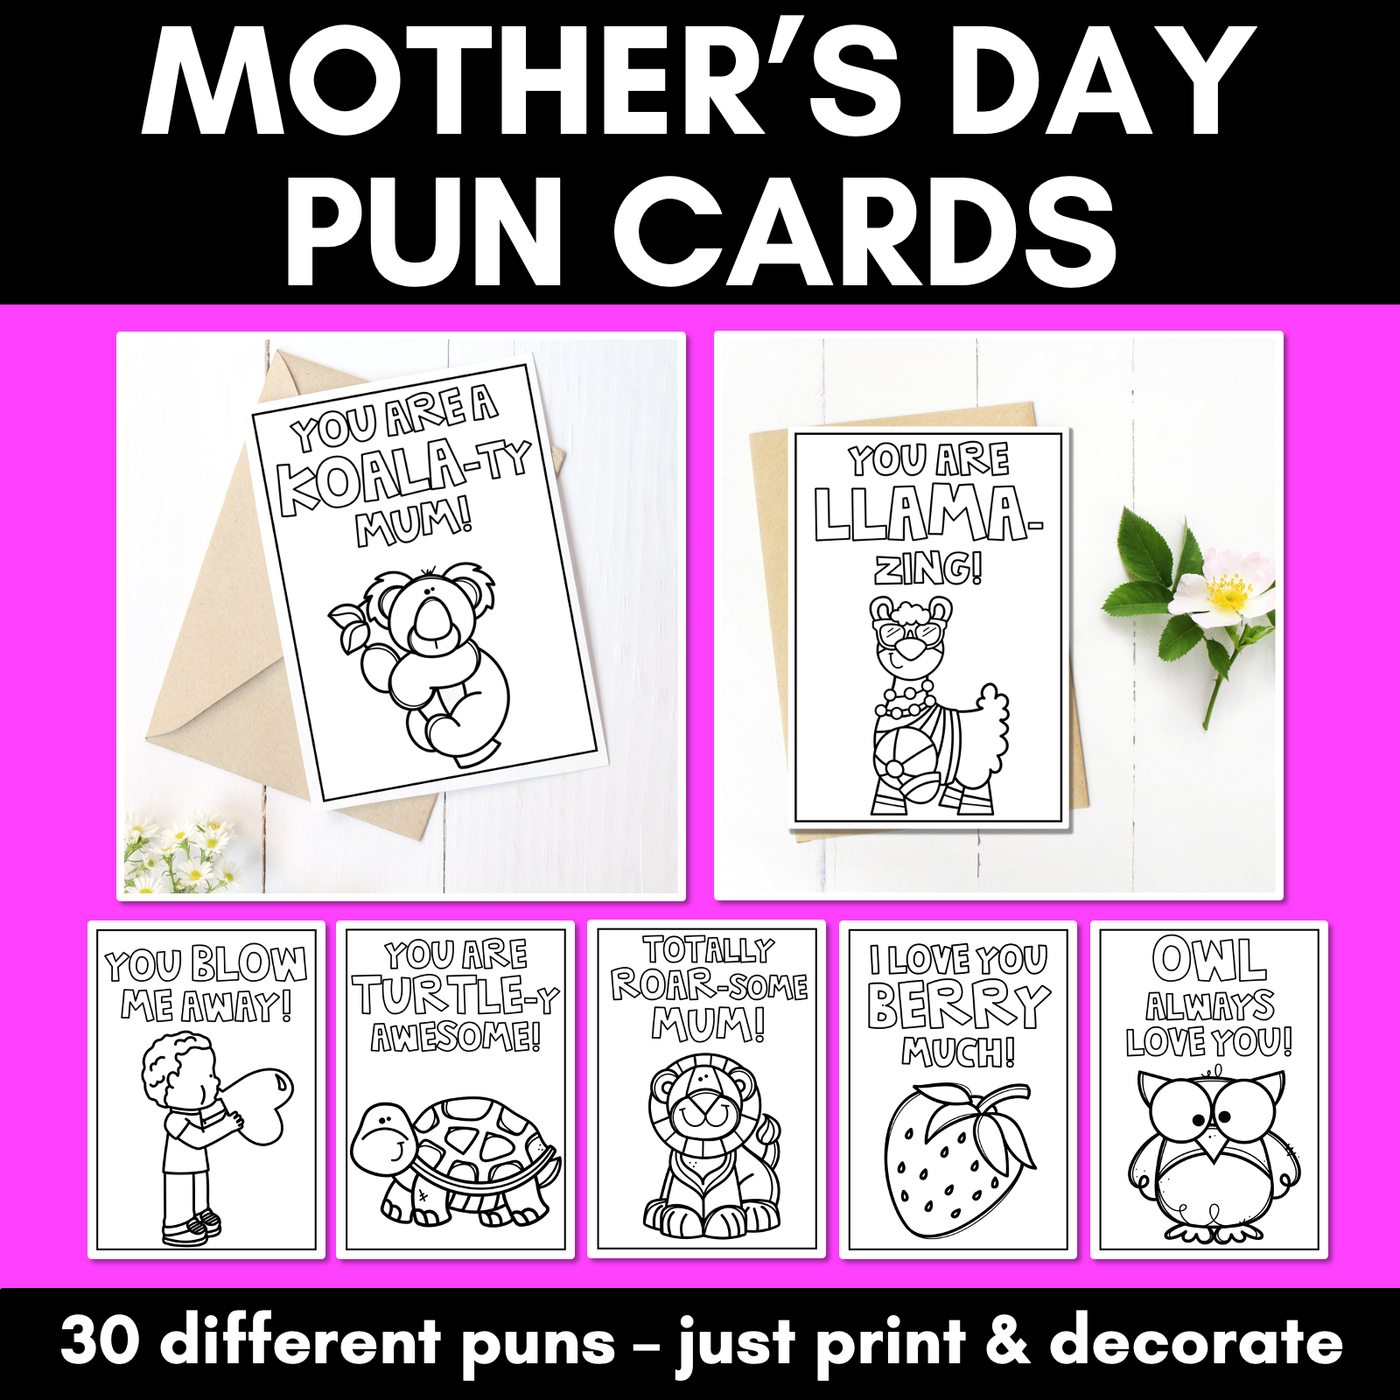 Mother's Day Pun Cards